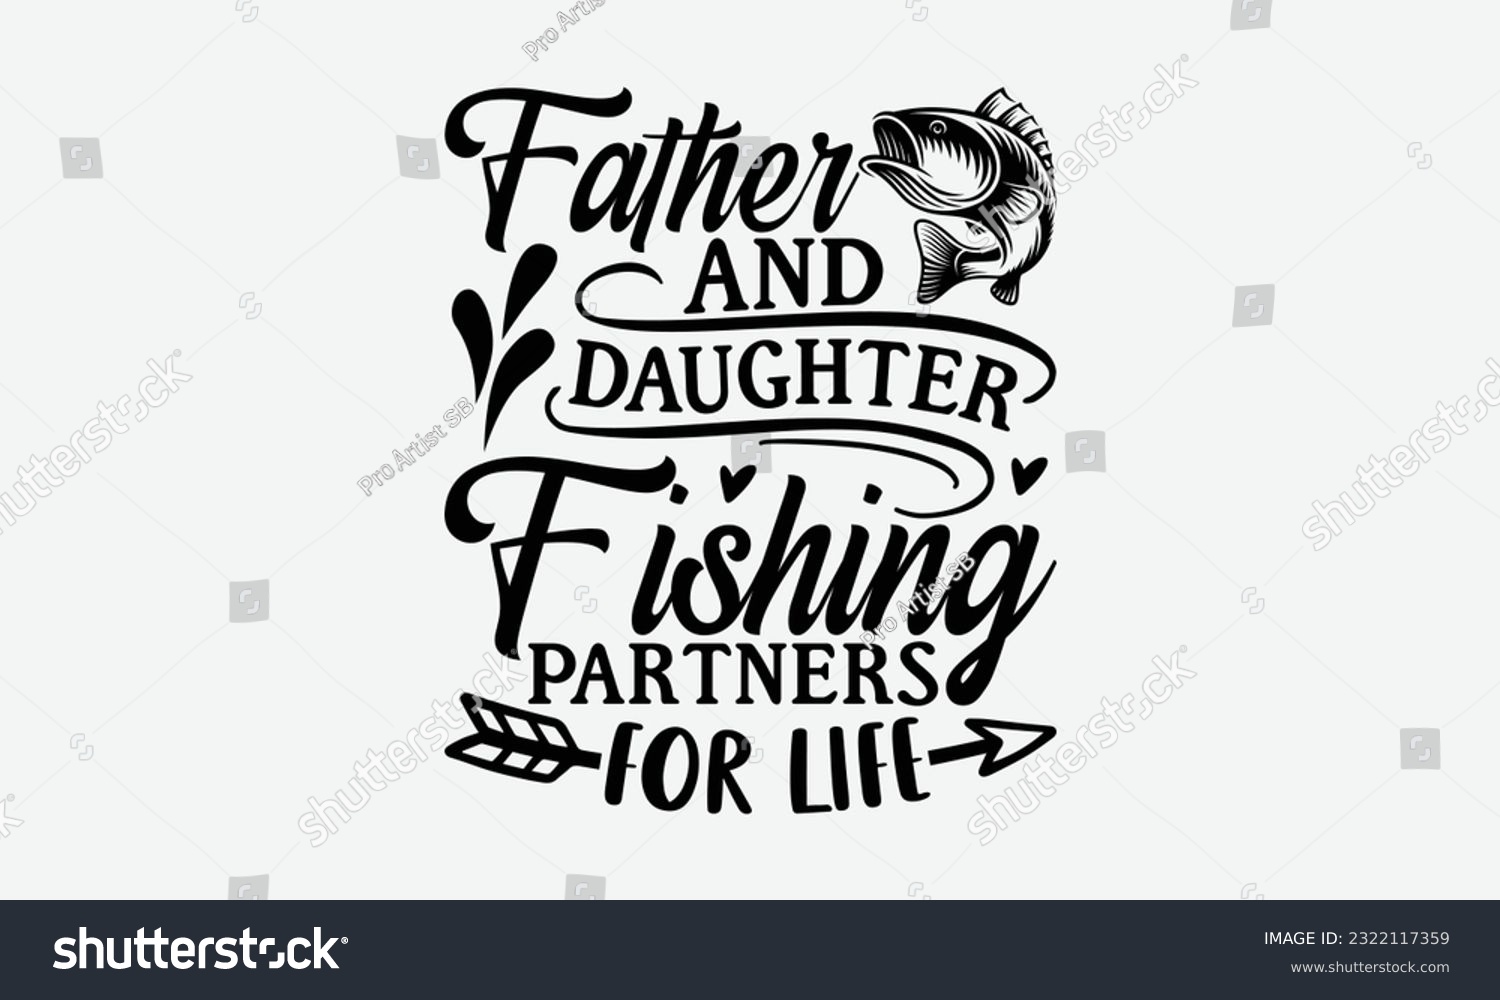 SVG of Father And Daughter Fishing Partners For Life - Fishing SVG Design, Fisherman Quotes, Handmade Calligraphy Vector Illustration, Isolated On White Background. svg